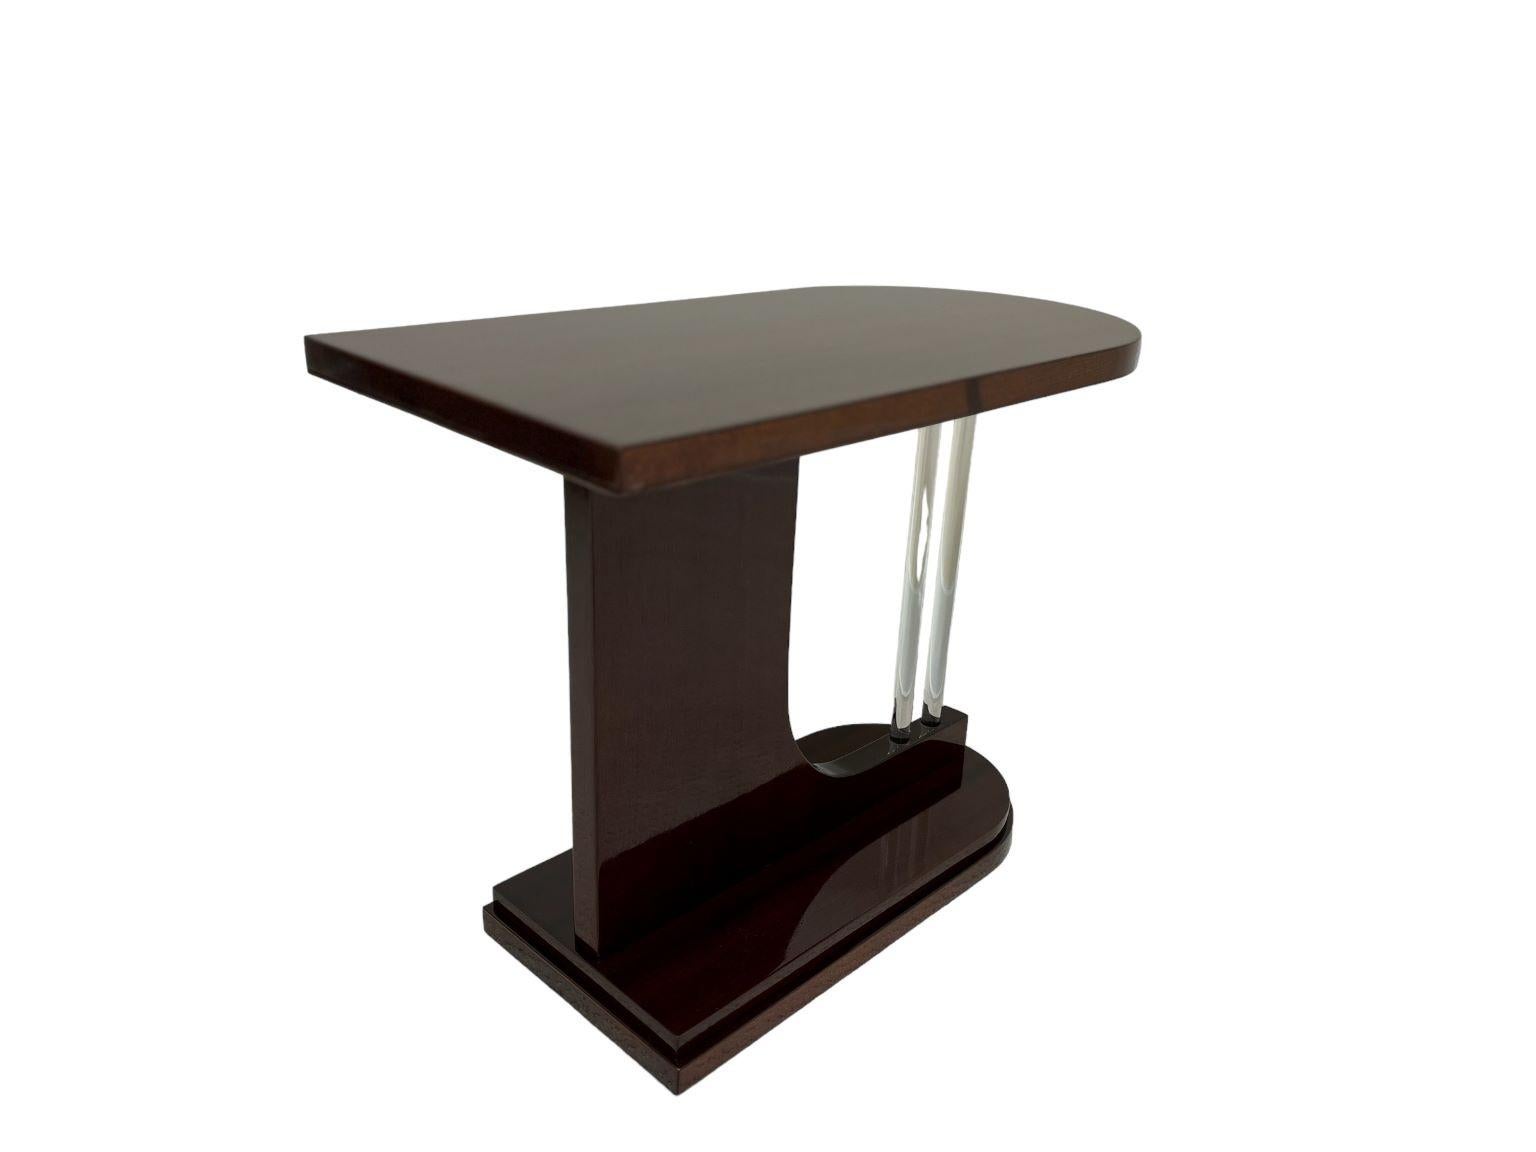 American Streamline Moderne  Art Deco Bullet Side Table With Glass Rods C.1930 For Sale 3